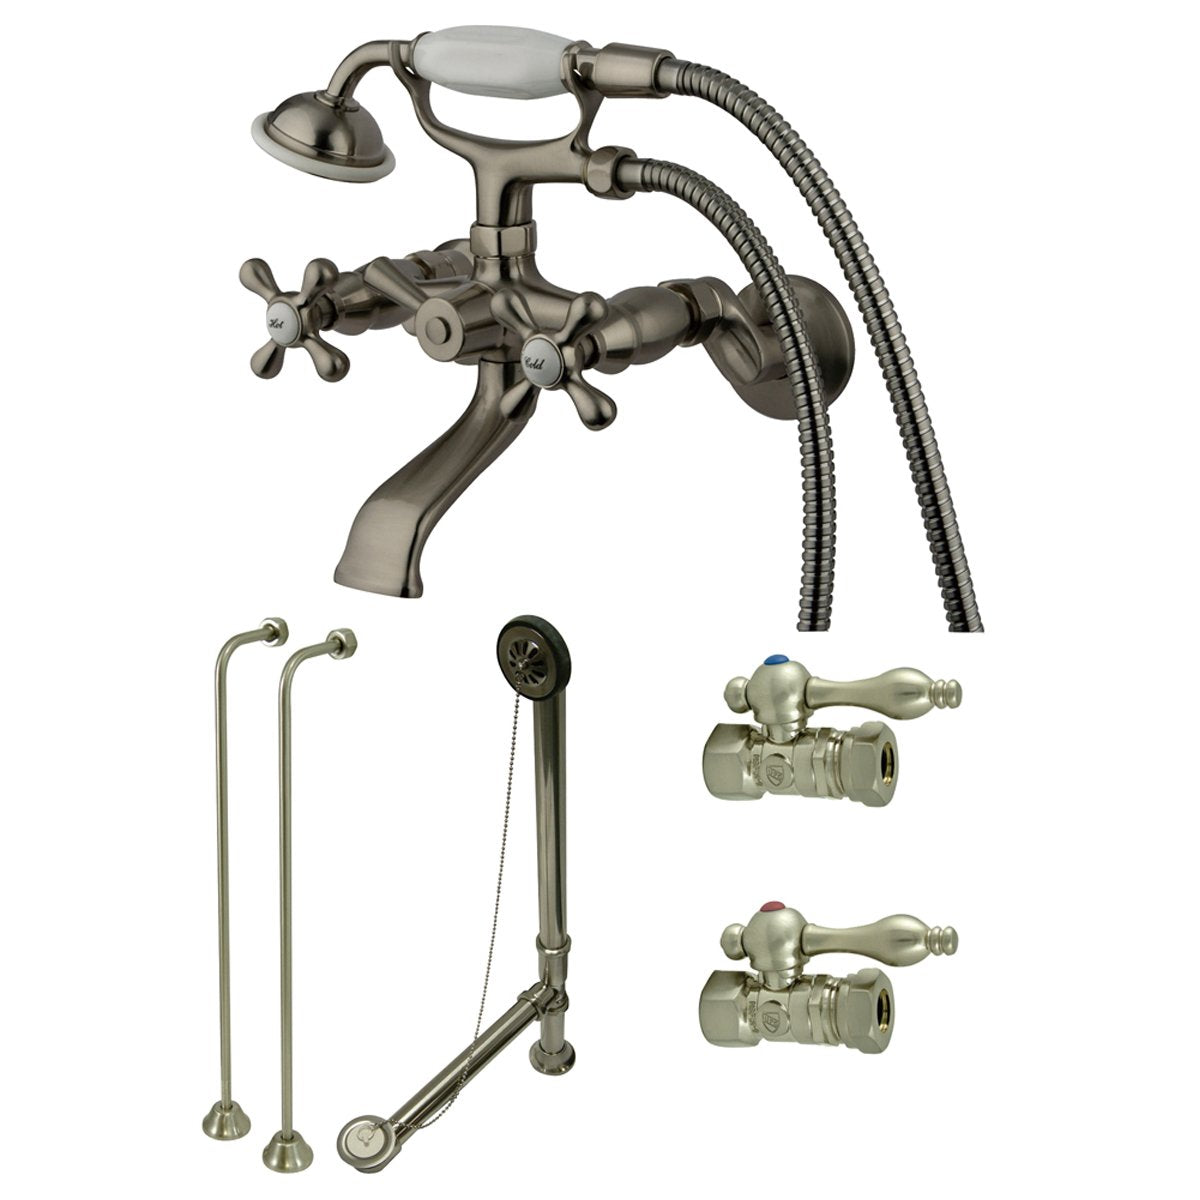 Kingston Brass Vintage Wall Mount Clawfoot Tub Package-Tub Faucets-Free Shipping-Directsinks.